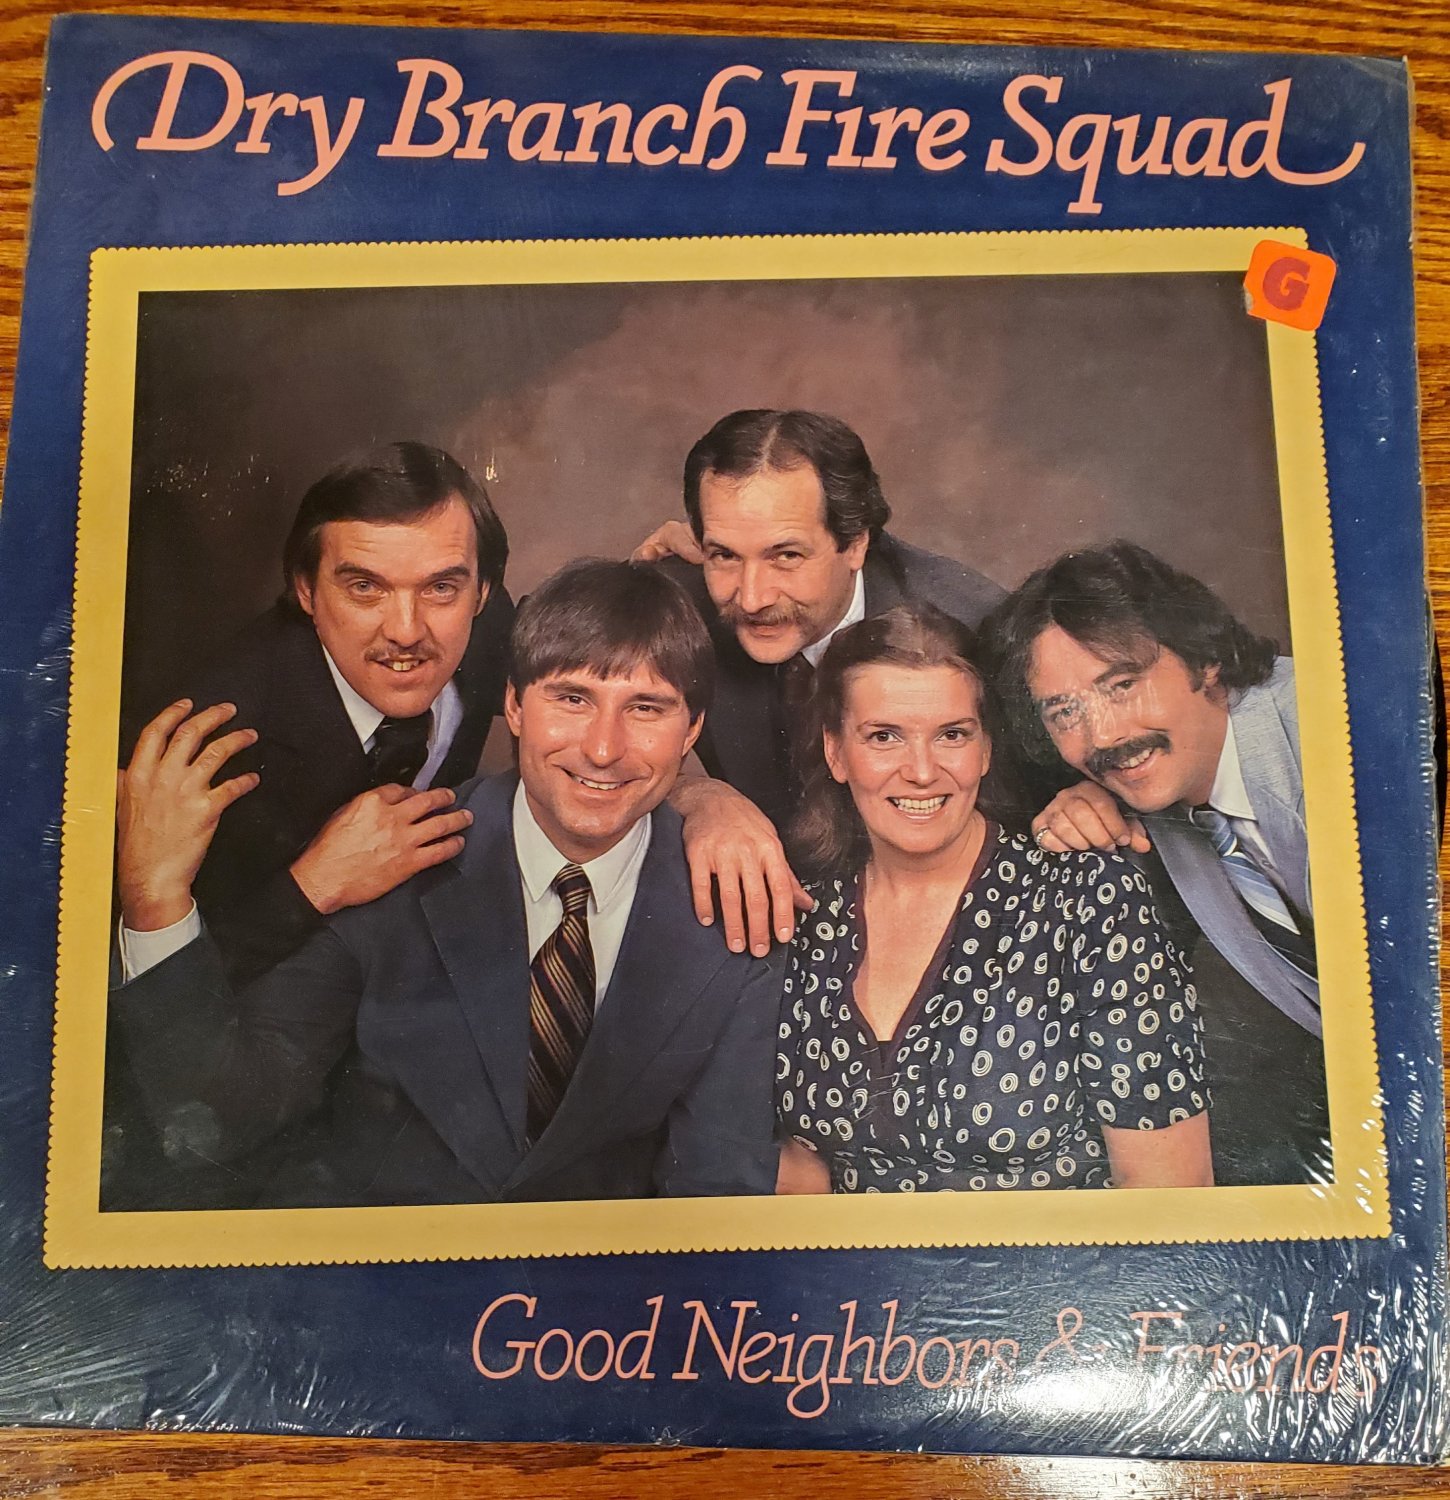 Dry Branch Fire Squad Good Neighbors and Friends Bluegrass 33 RPM  Record Music LP Rounder